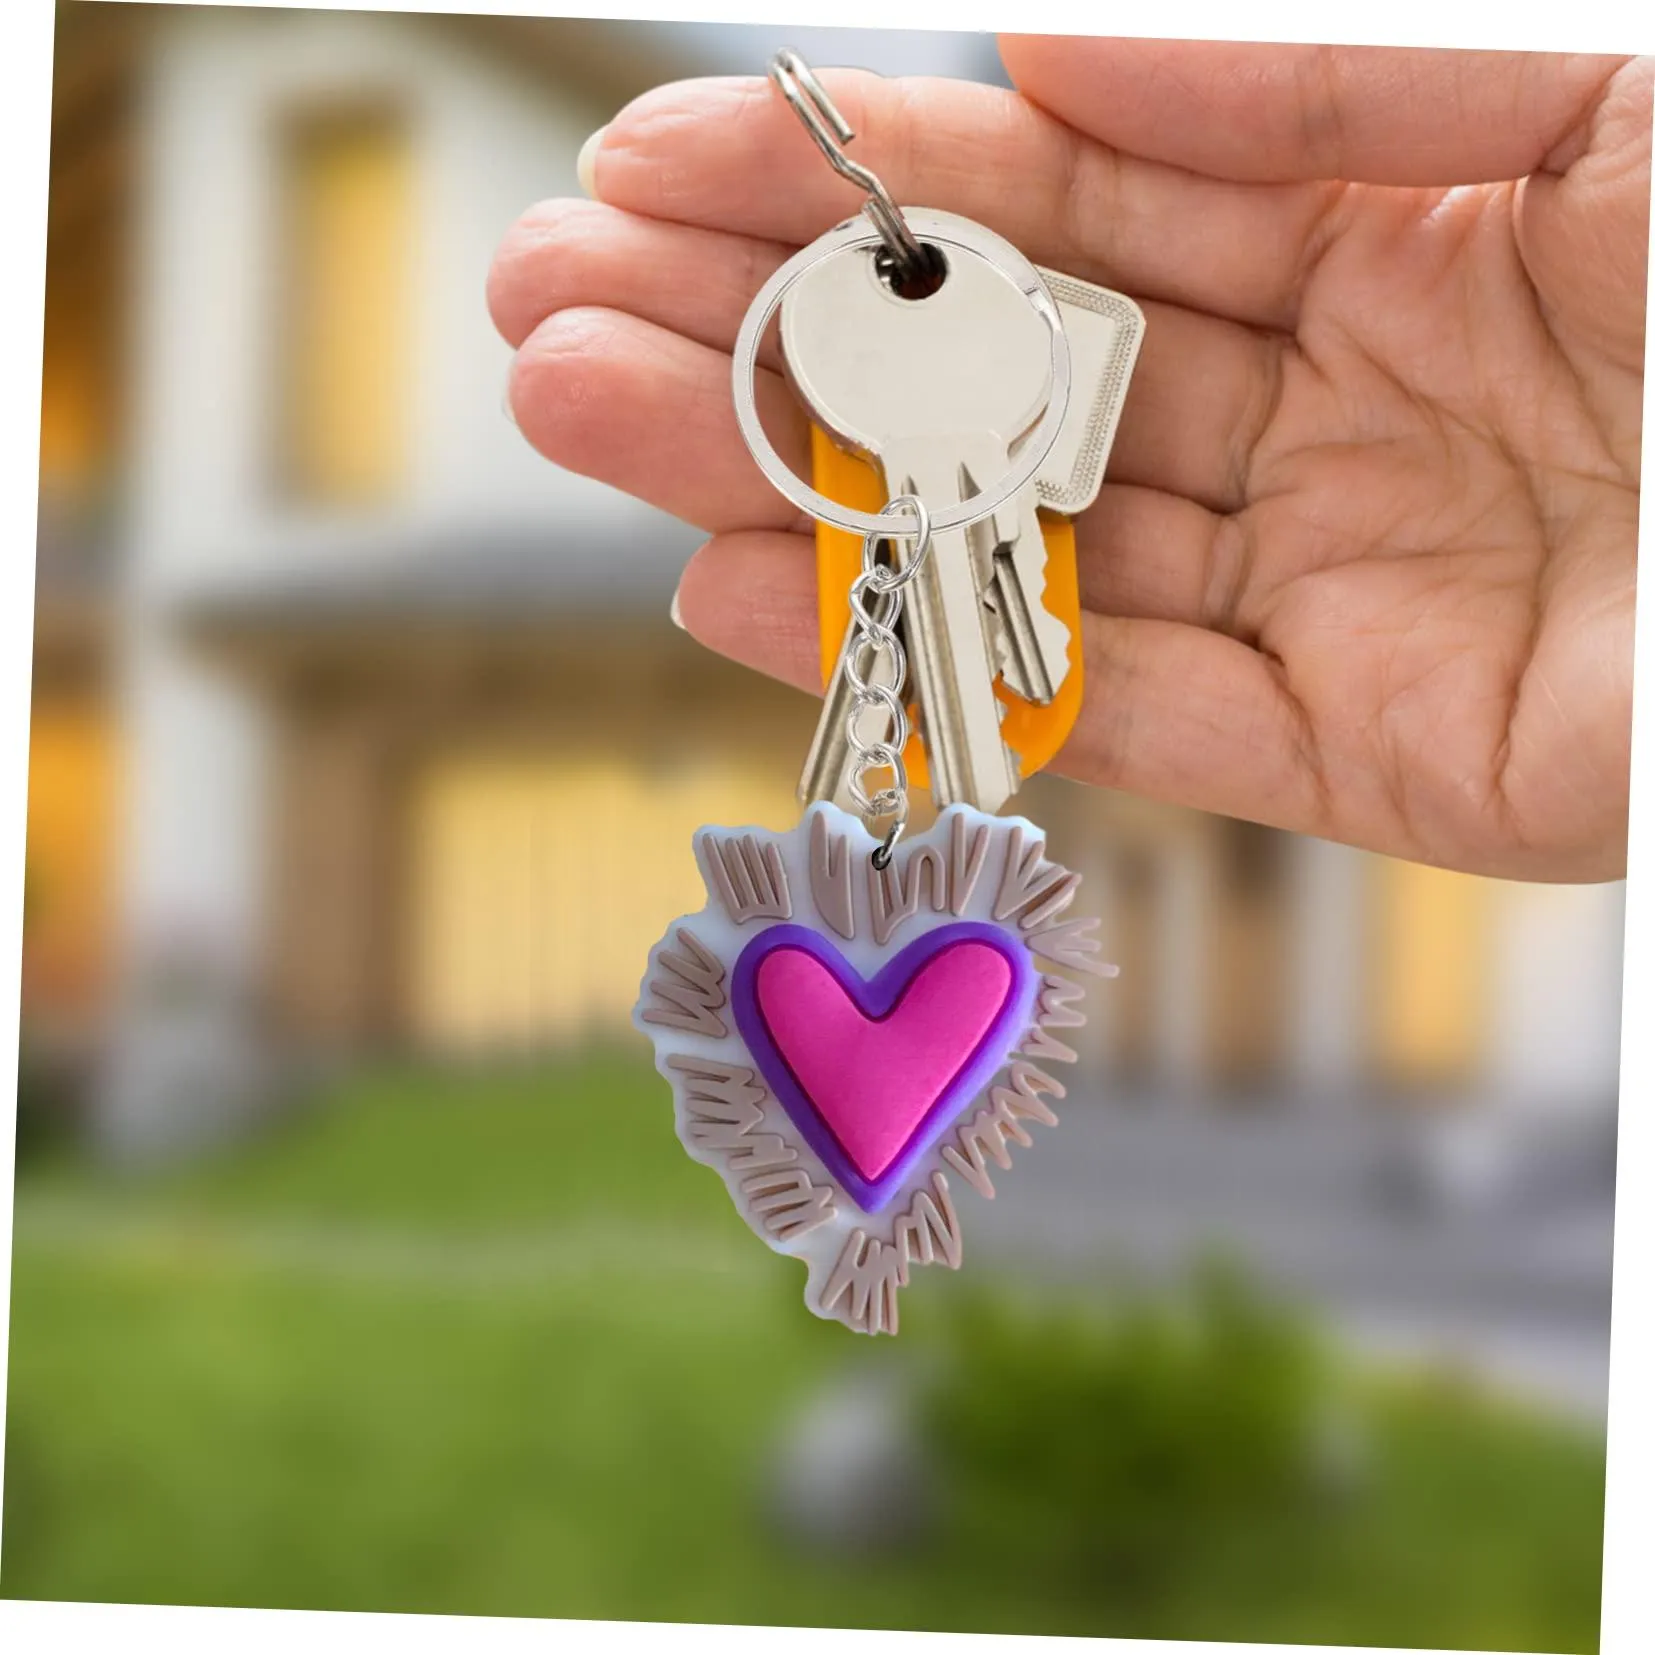 love keychain key ring for men keyring backpacks girls suitable schoolbag goodie bag stuffers supplies keychains tags stuffer christmas gifts and holiday charms boys